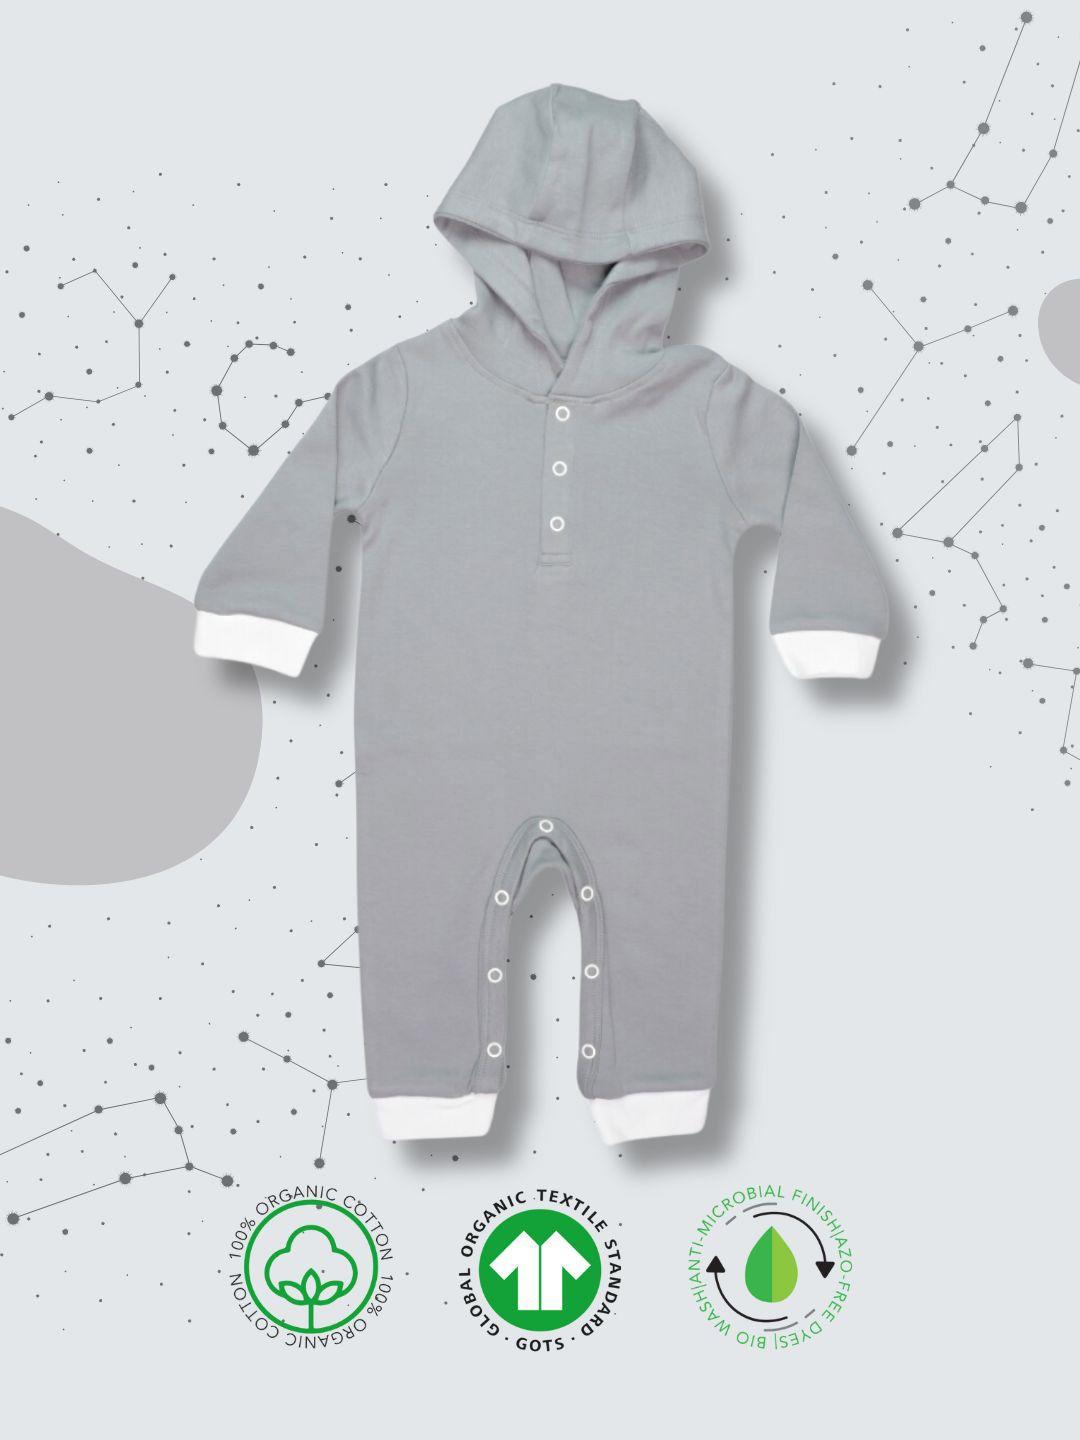 baesd-infants-pure-organic-cotton-rompers